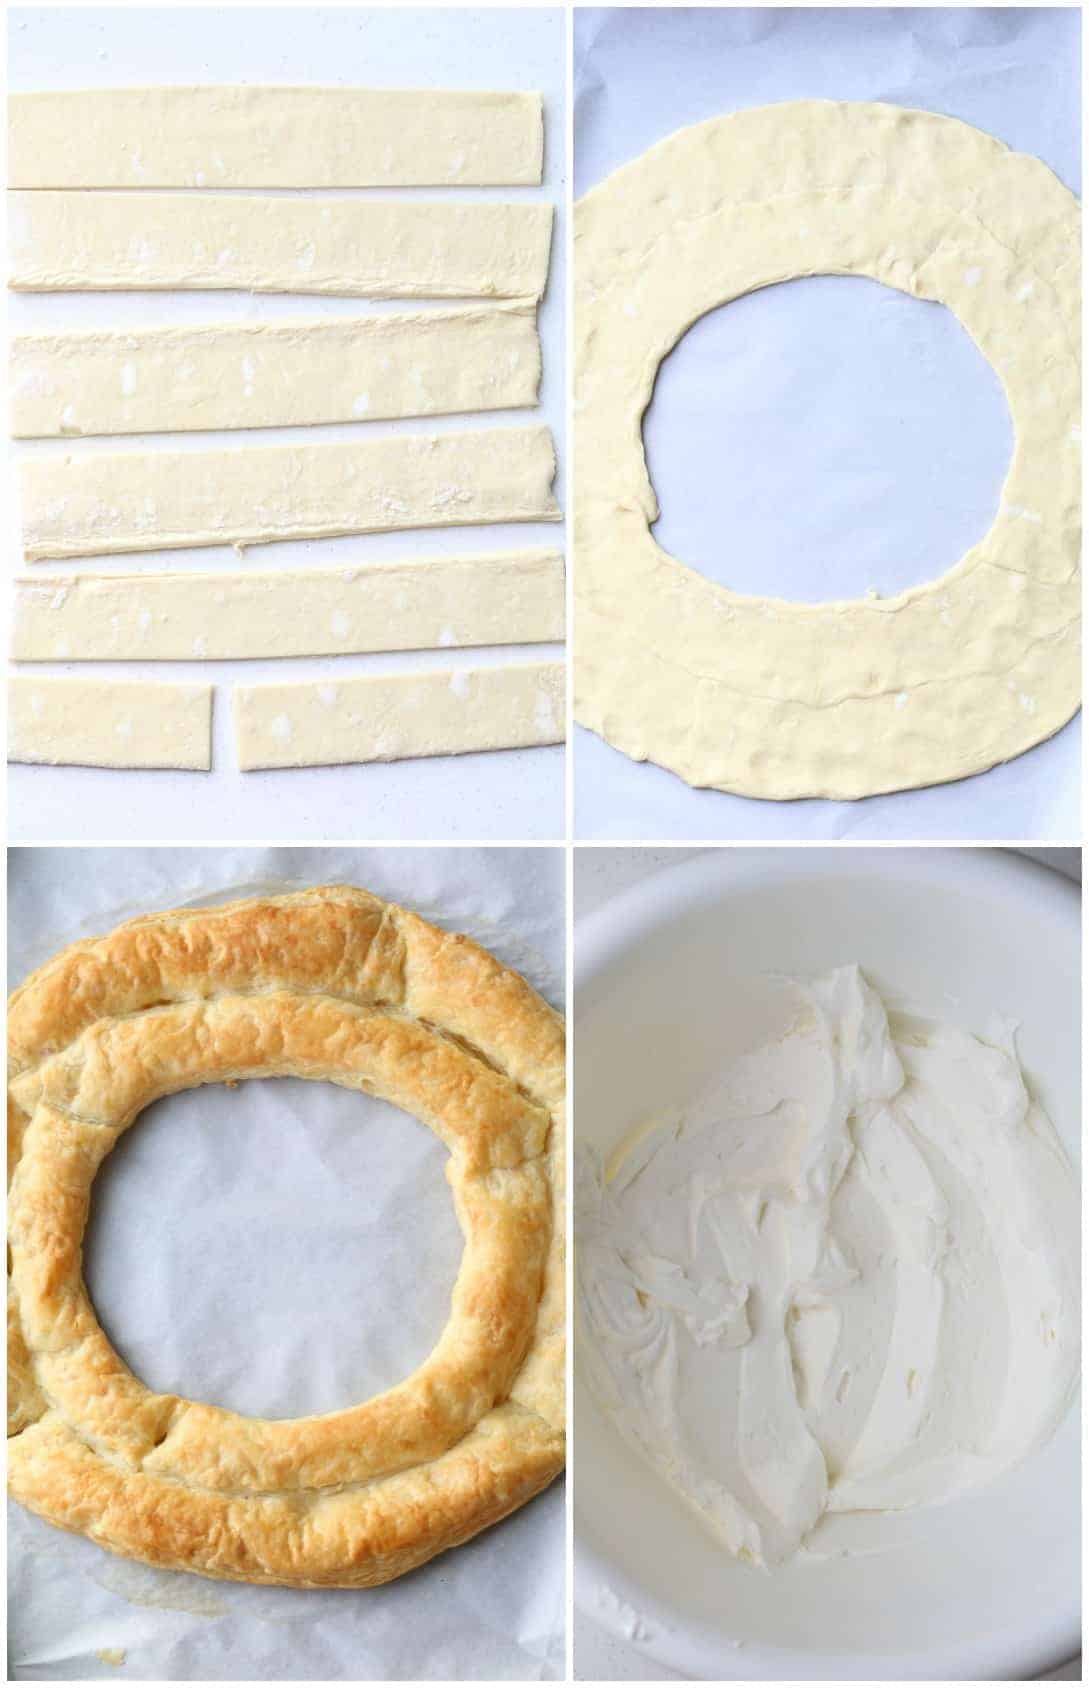 Step-by-step photos how to make puff pastry wreath and cream.